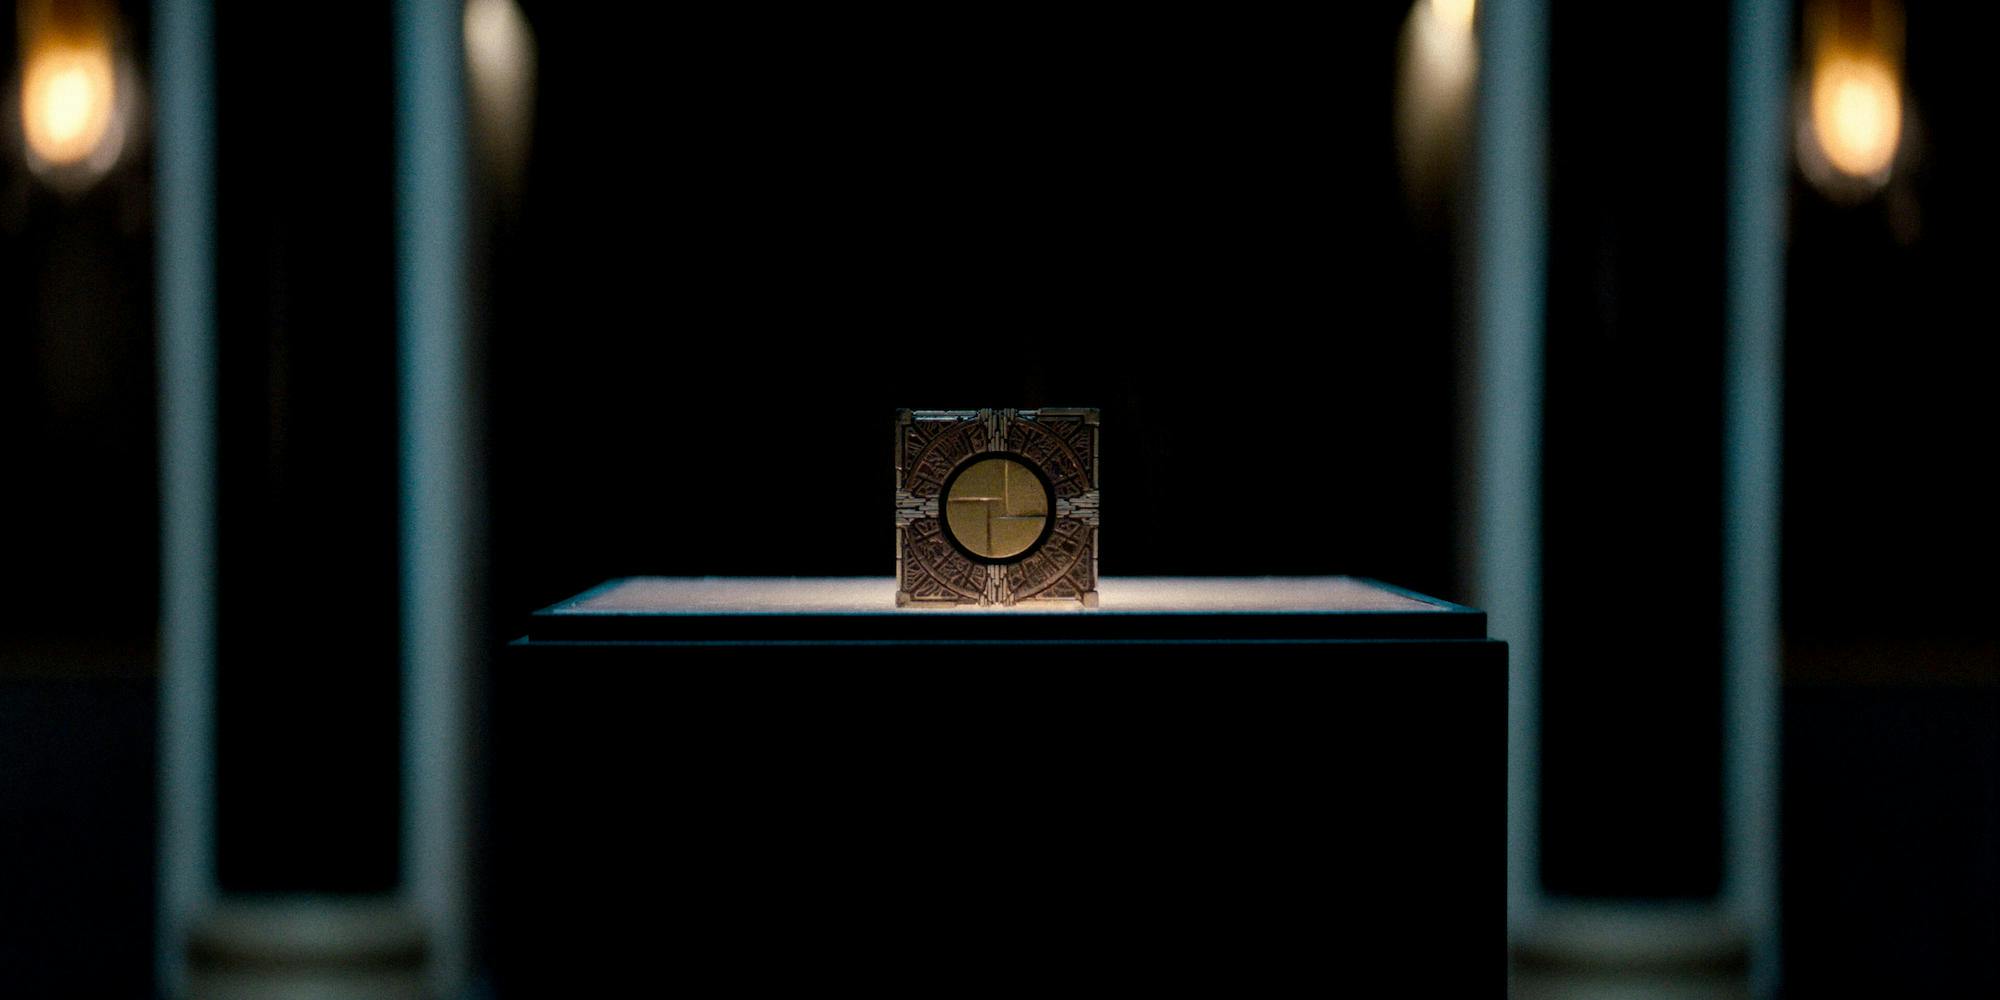 The hellraiser puzzle box, shown displayed on a platform